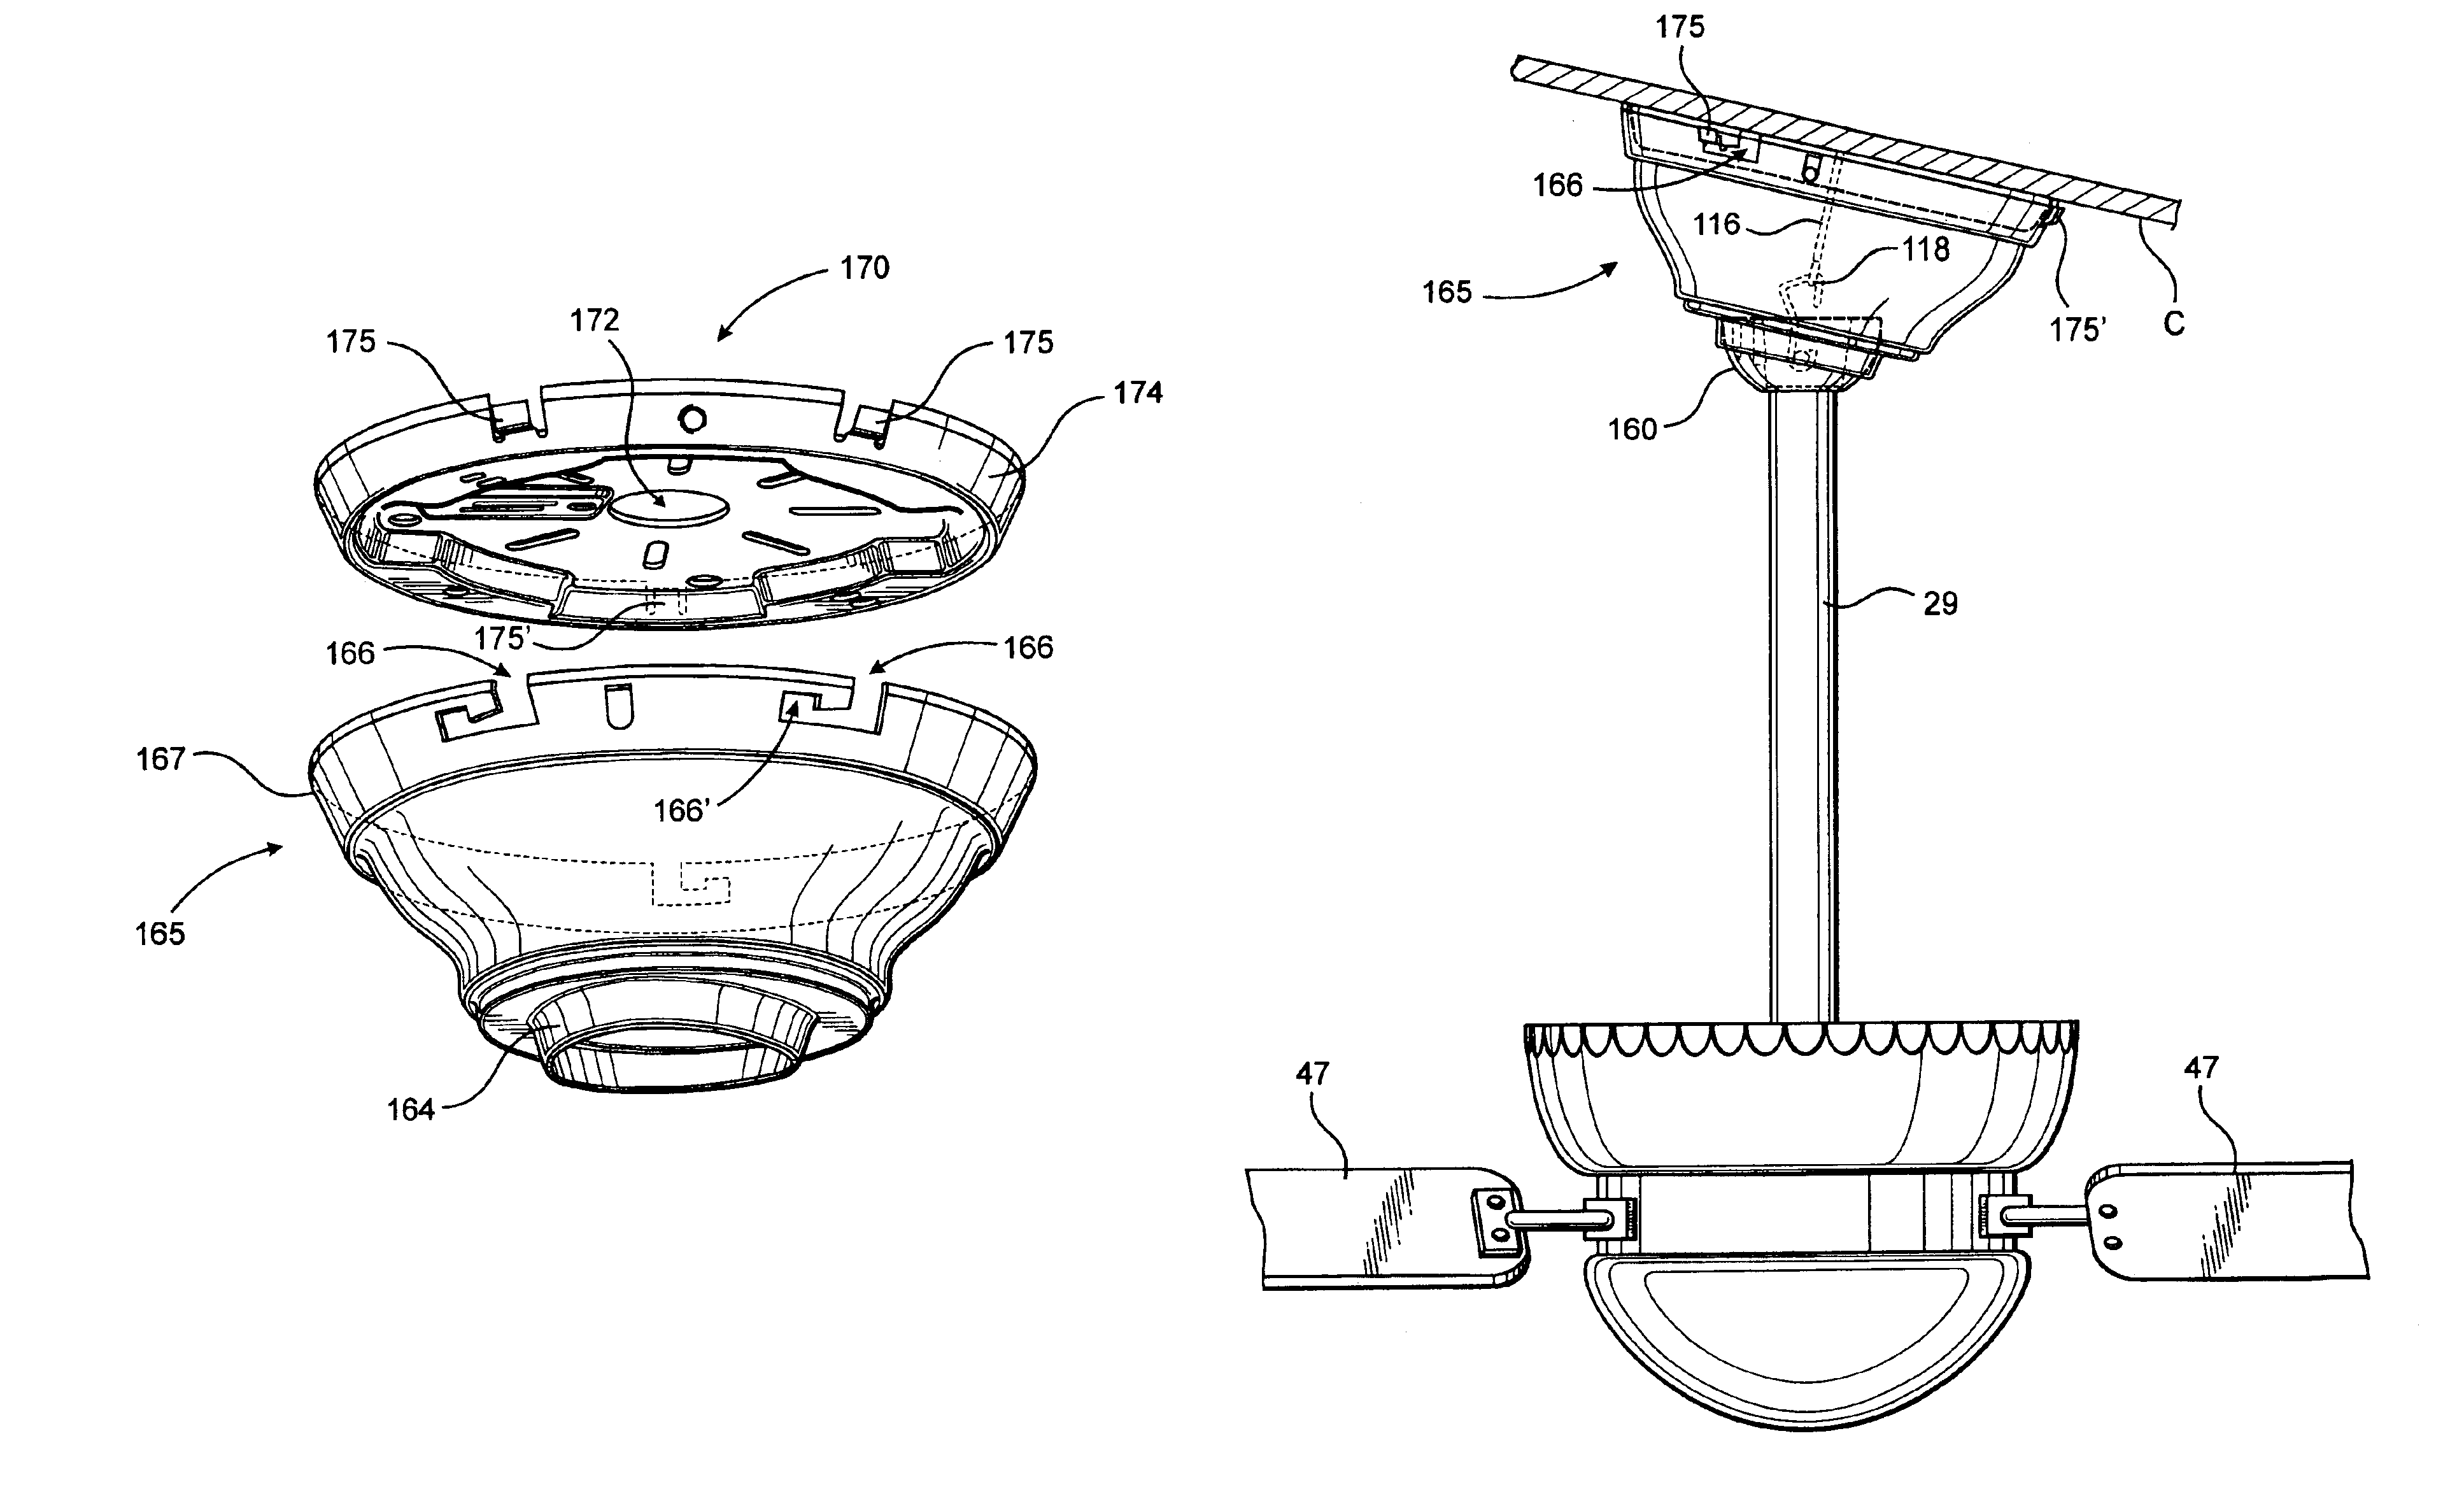 Mounting system for supporting a ceiling fan assembly